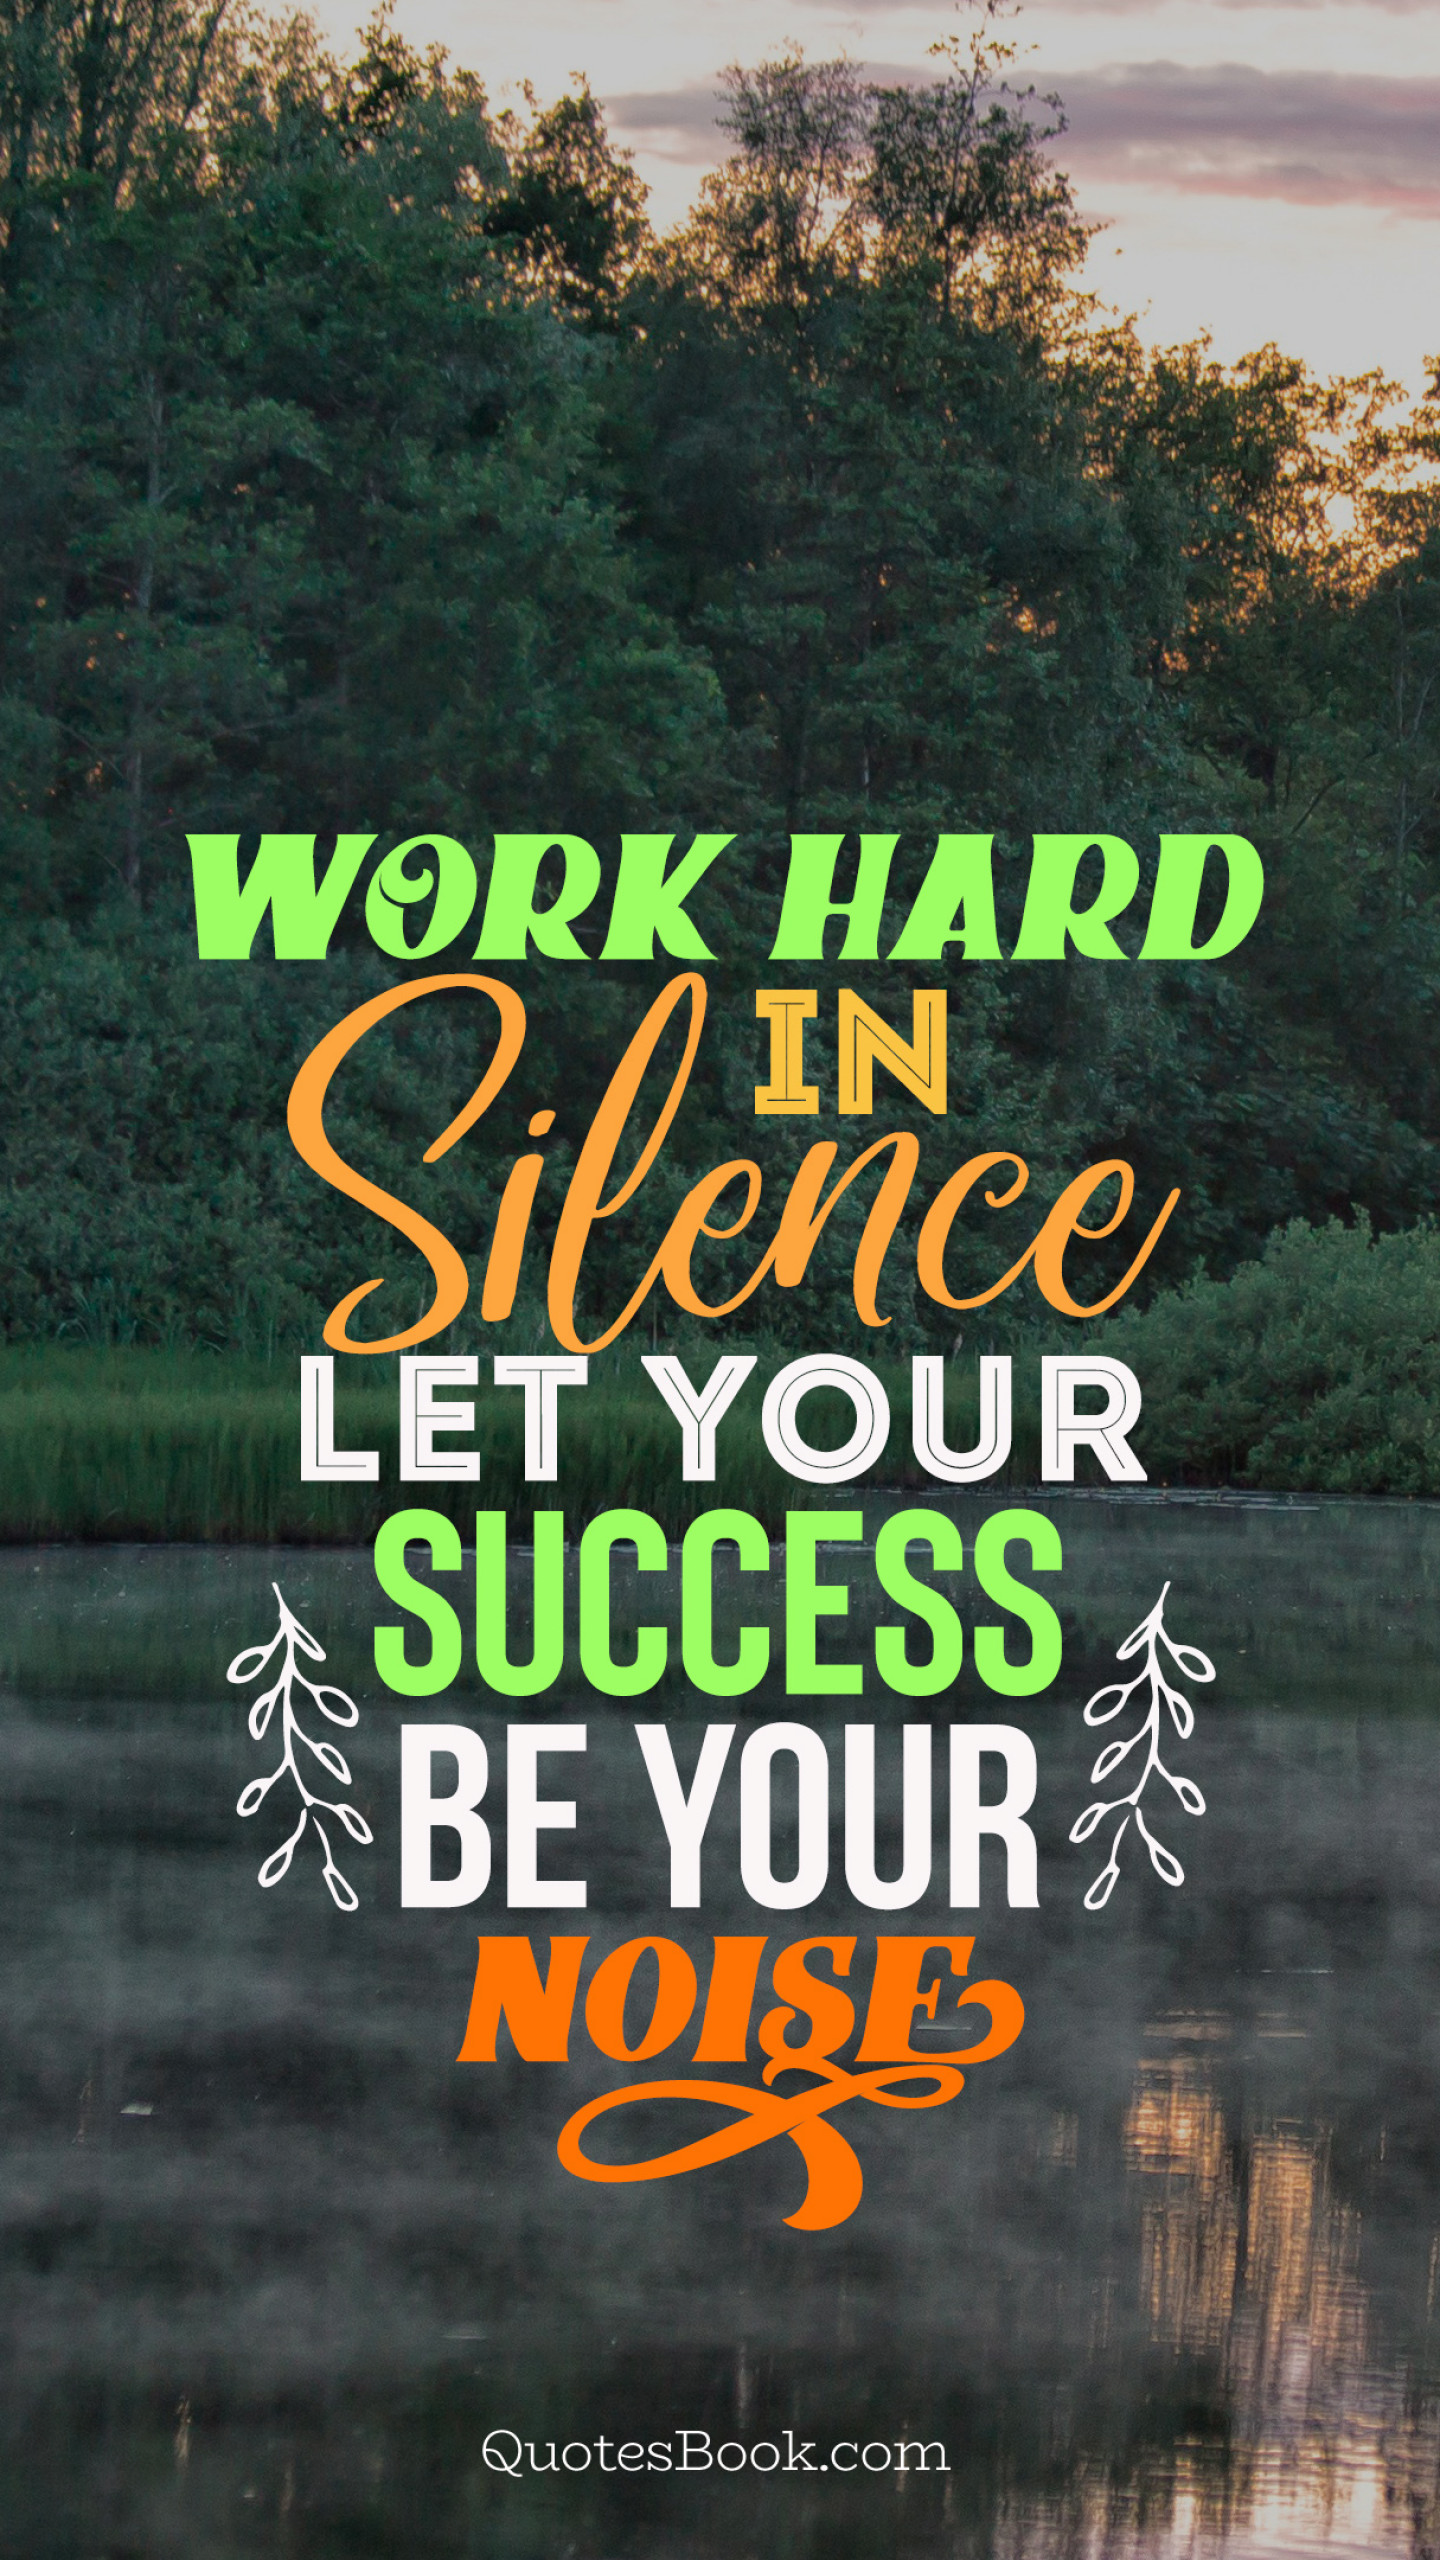 Work hard in silence let your success be your noise - QuotesBook